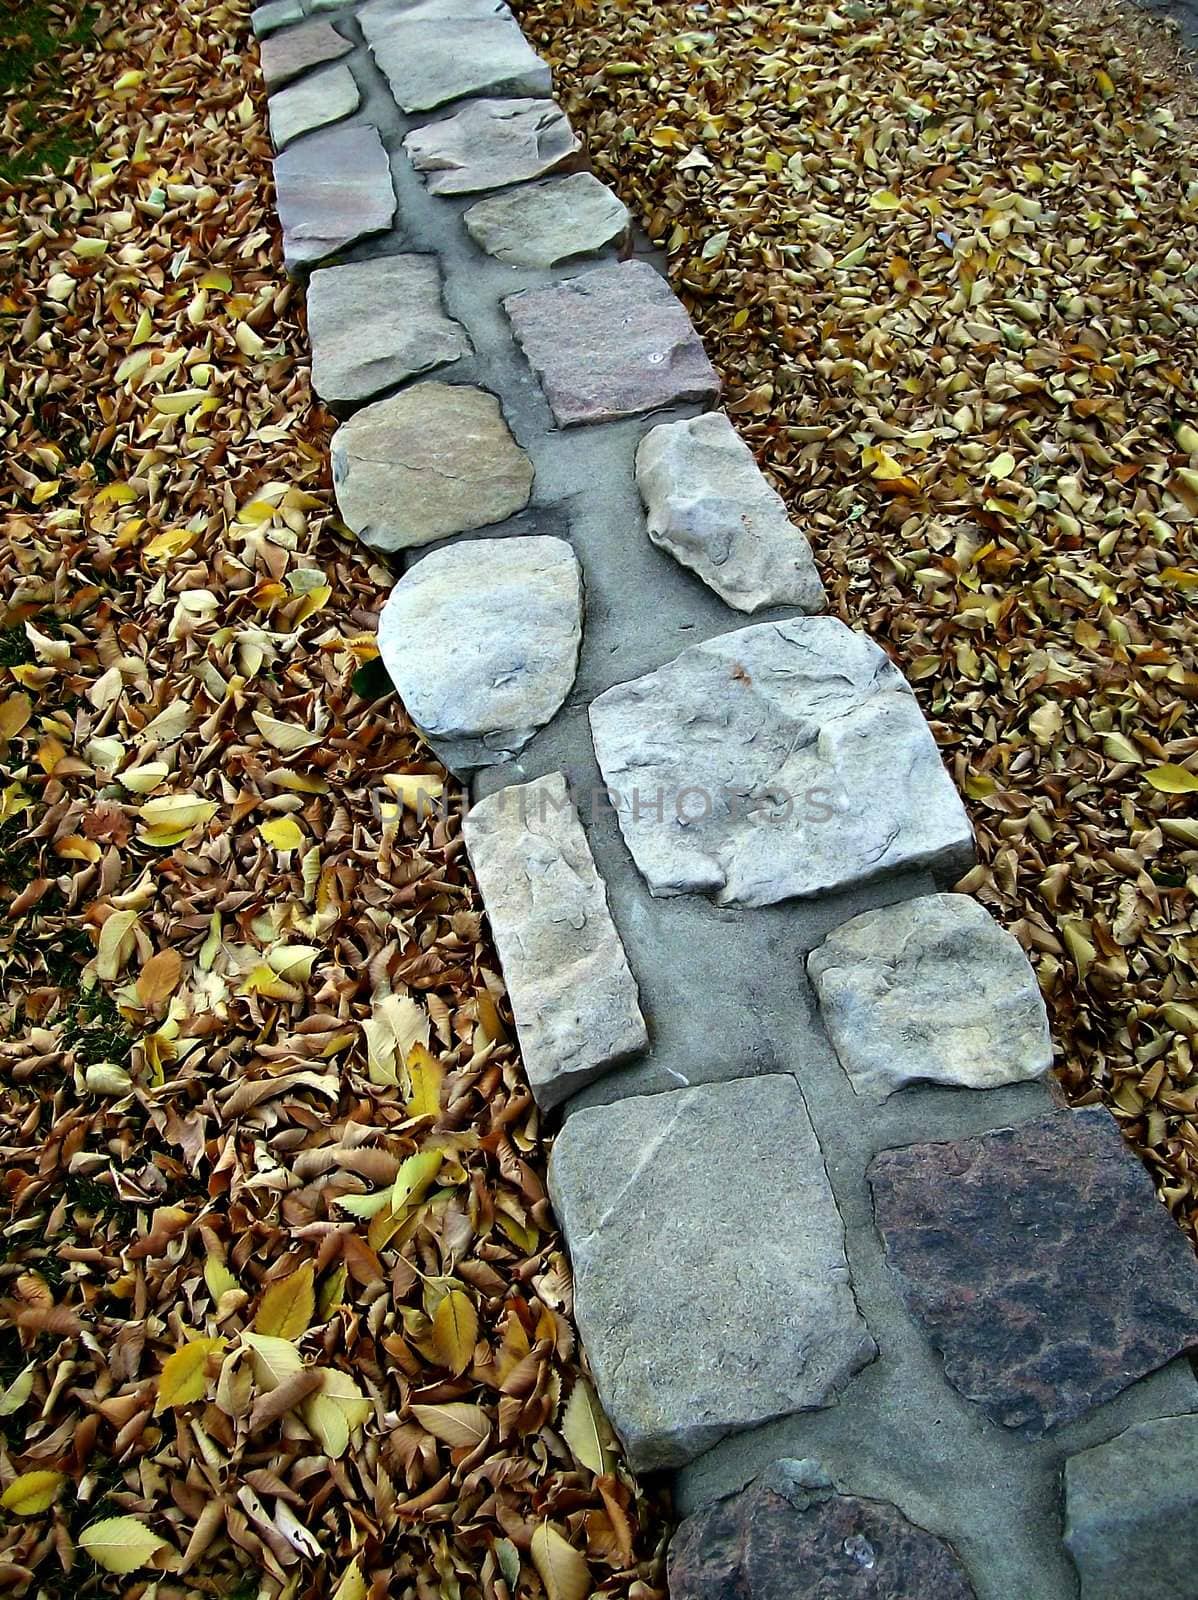 Autumn leaves piled alongside a stone and mortar wall.